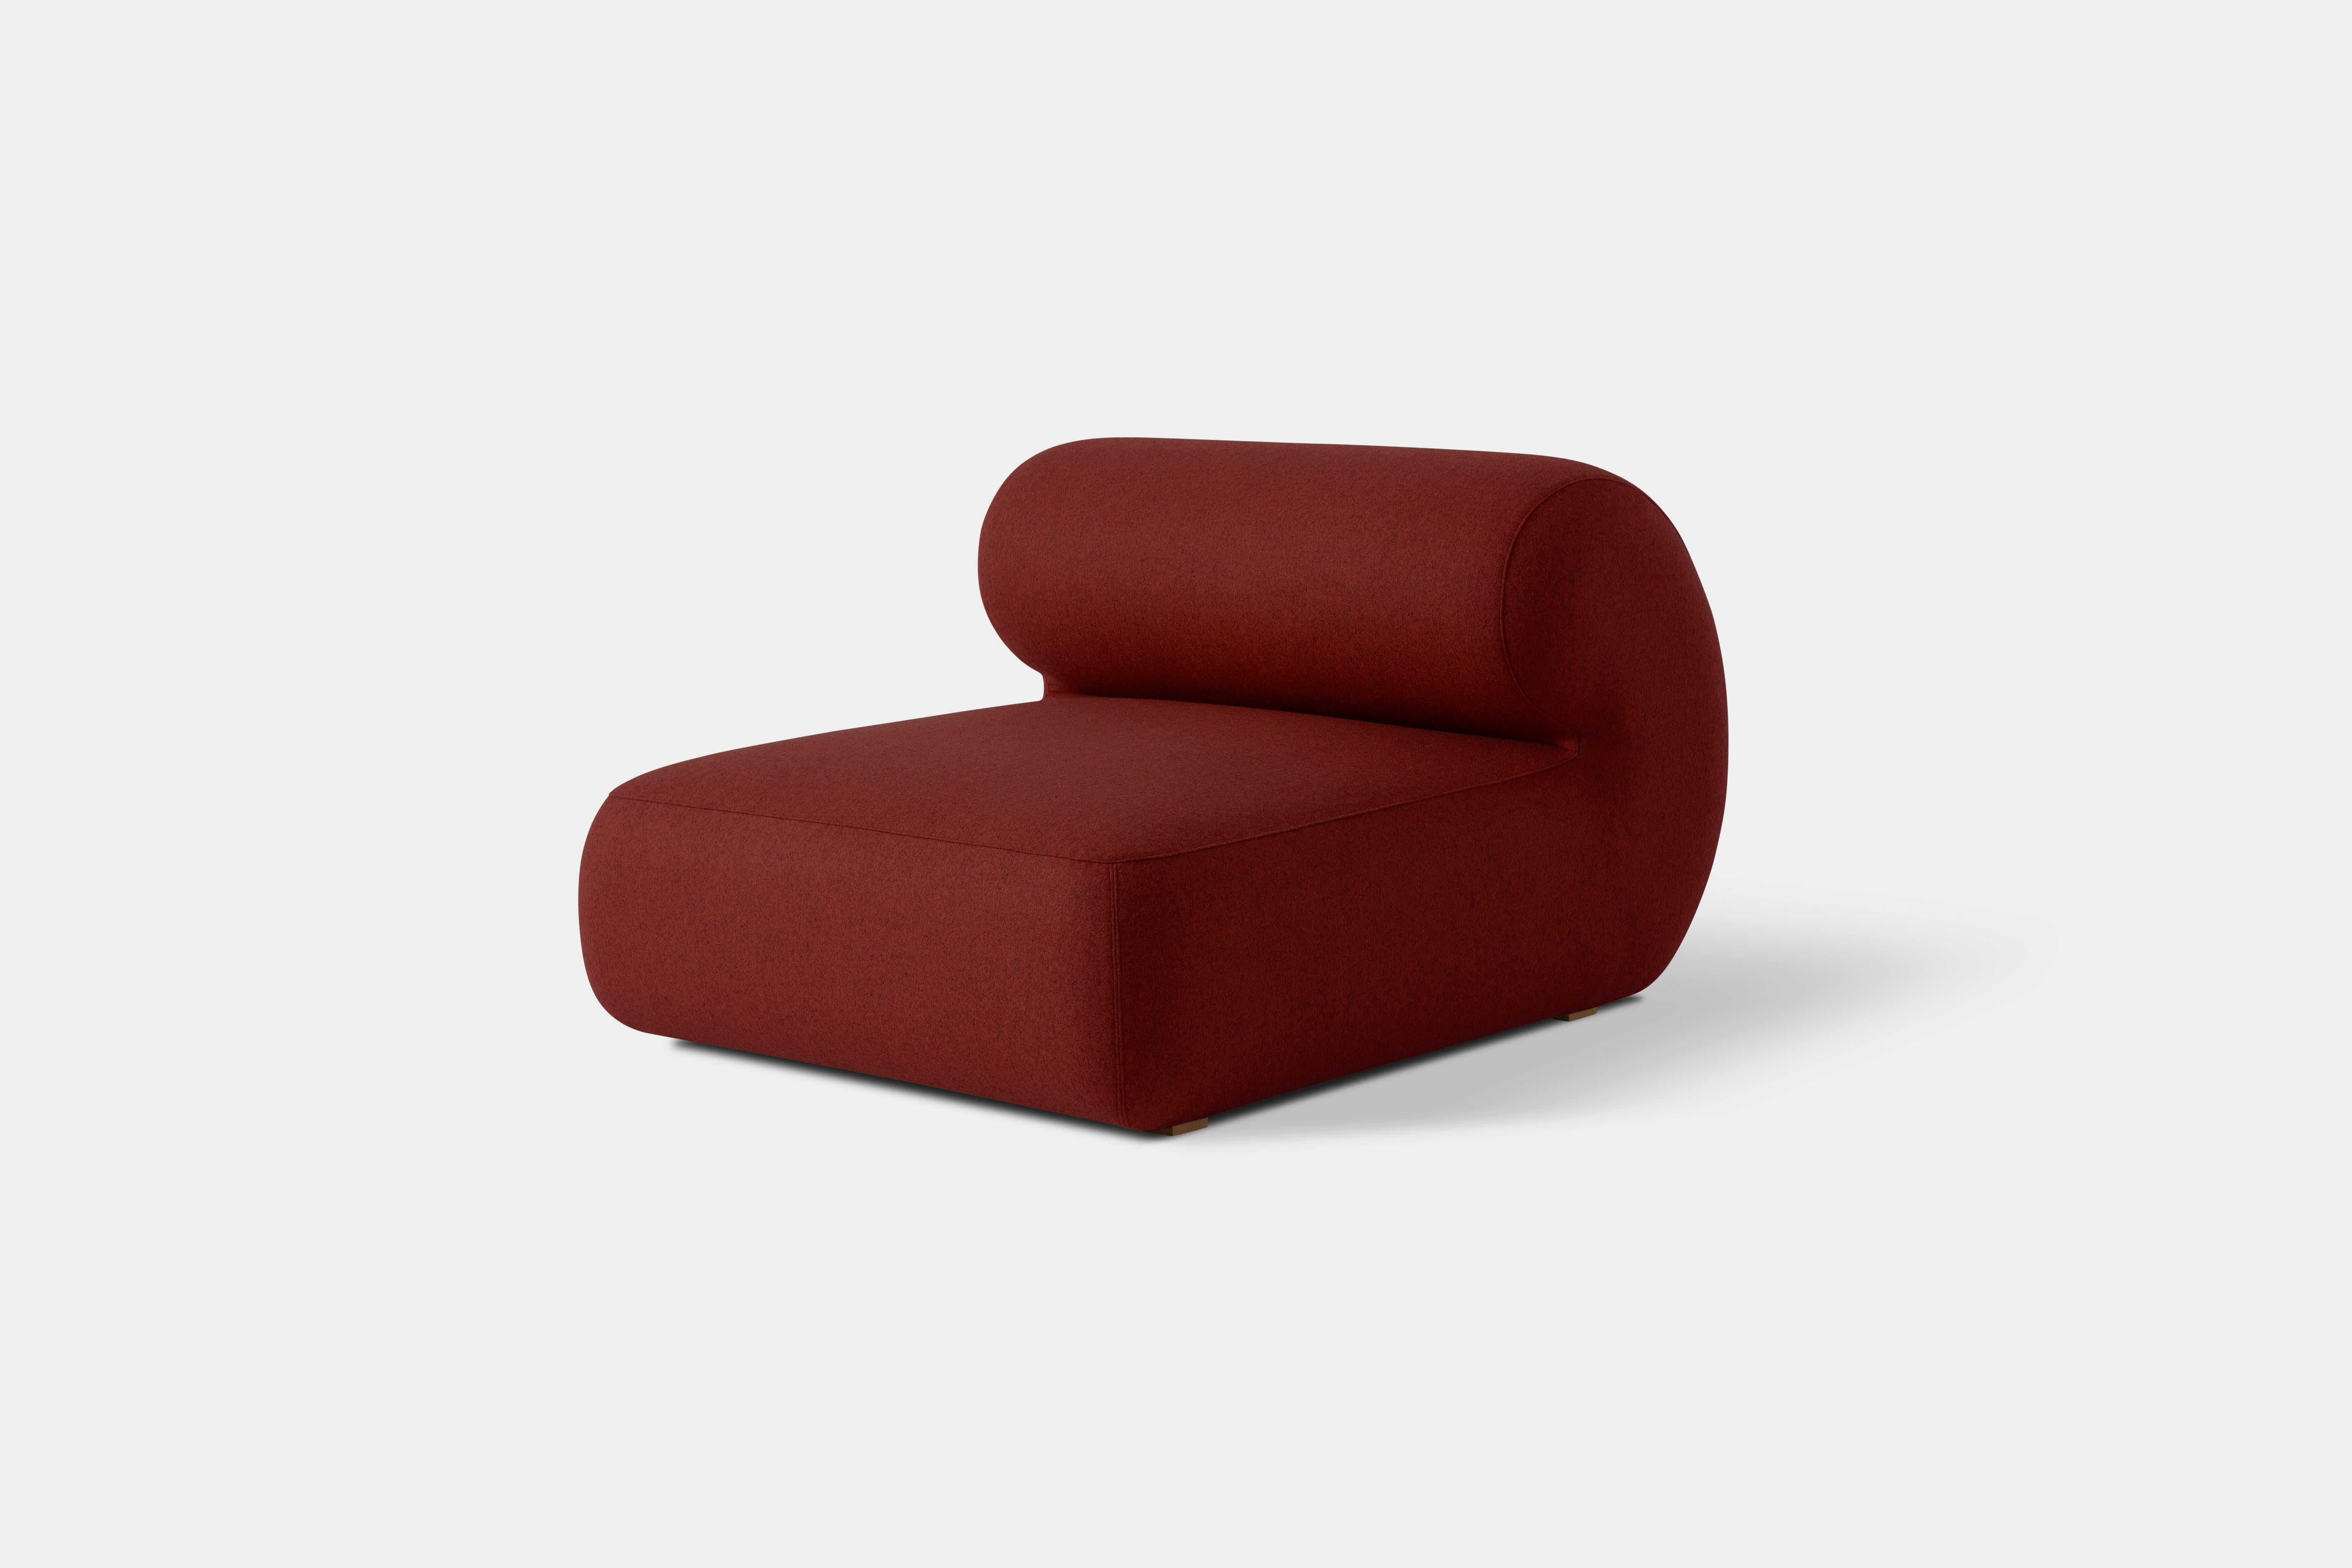 Red Michelin Straight Module by Pepe Albargues
Dimensions: W 103 x D 113 x H 71 cm
Materials: Pinewood, plywood and tablex structure.
Foam CMHR (high resilience and flame retardant) for all our cushion filling systems.
Lacquered beech wood